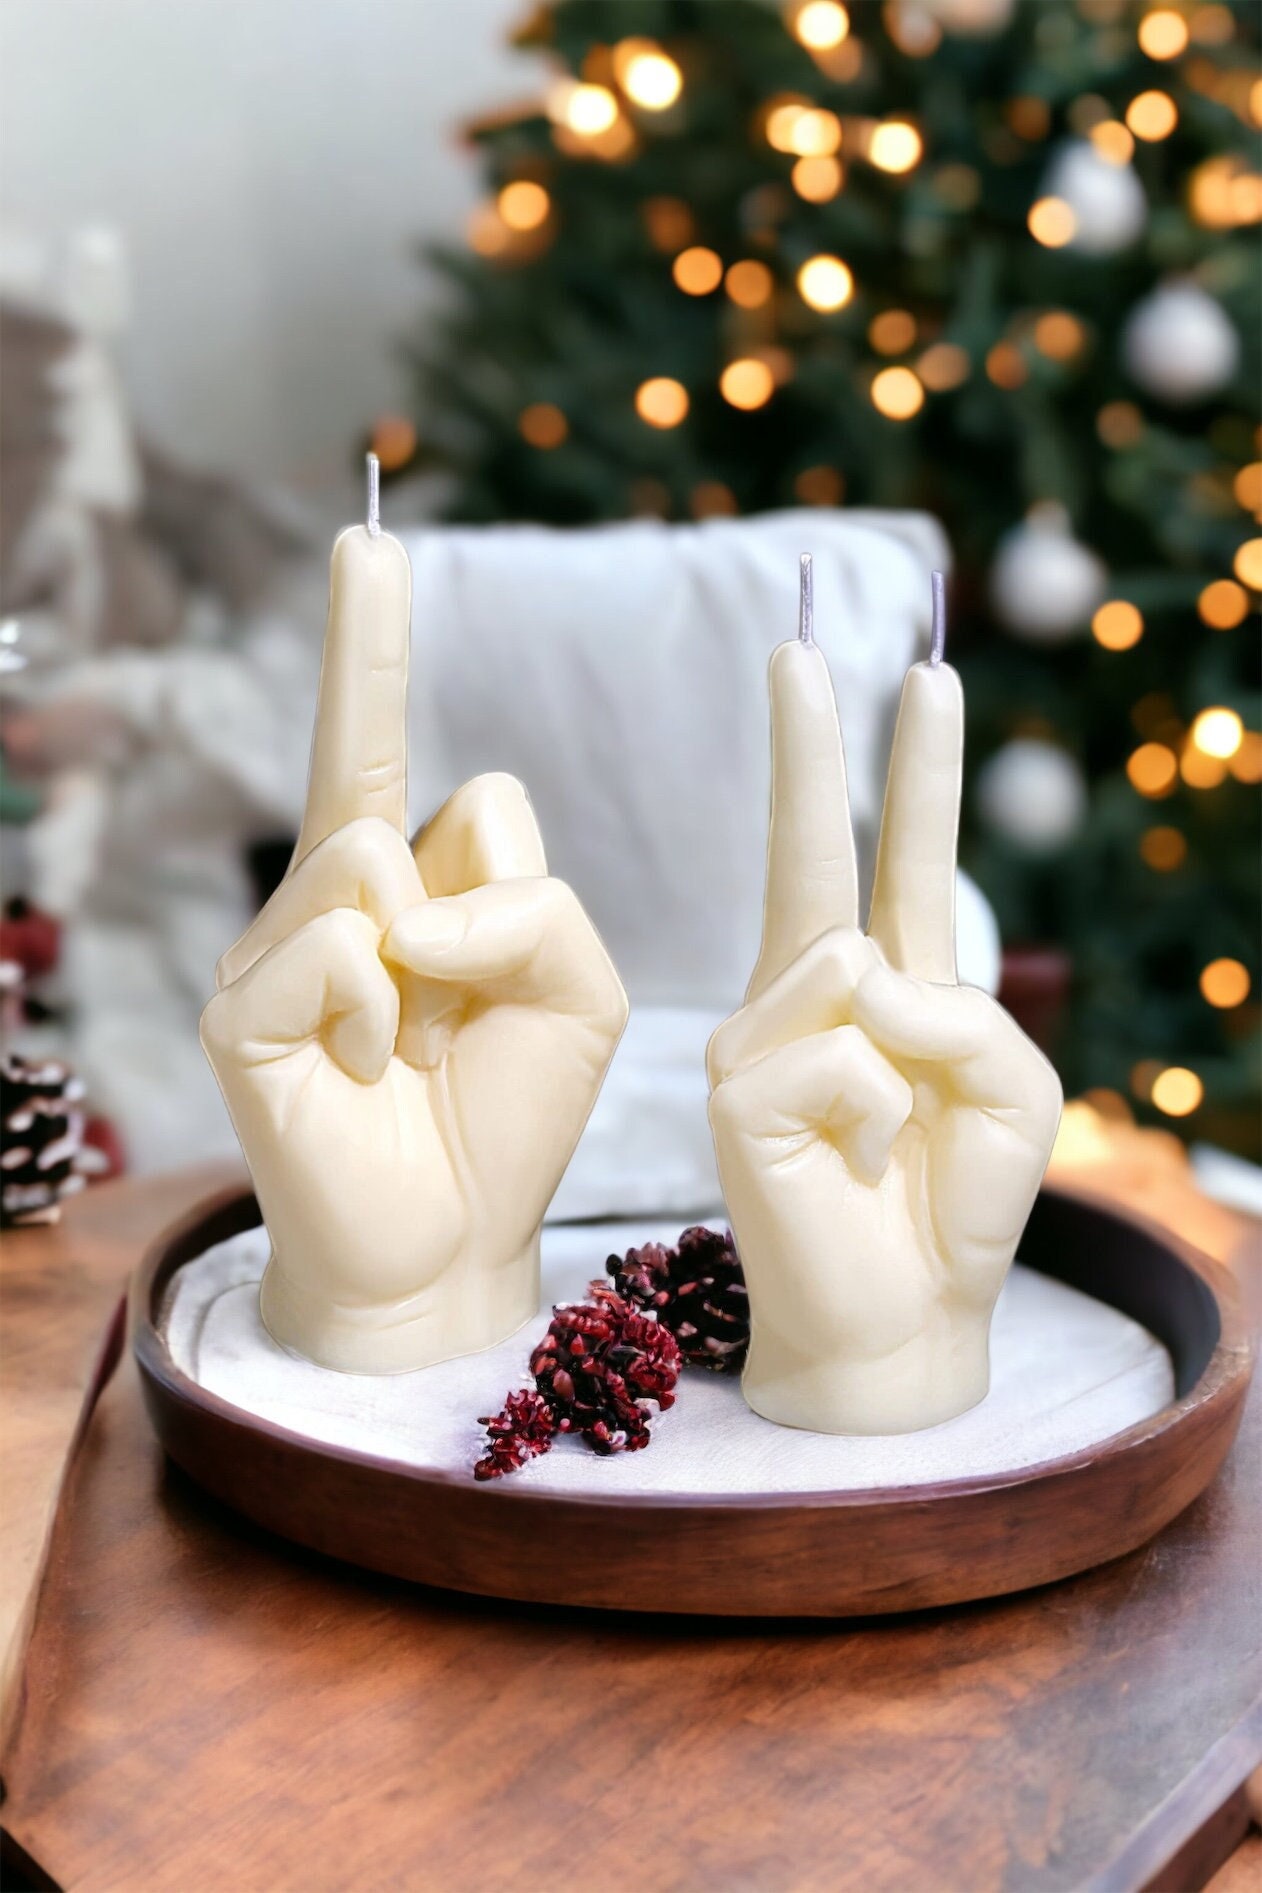 Creative Candles Middle Finger Shaped Gesture Scented Candles Niche Funny  Quirky Gifts Home Decoration Ornaments Birthday Gifts